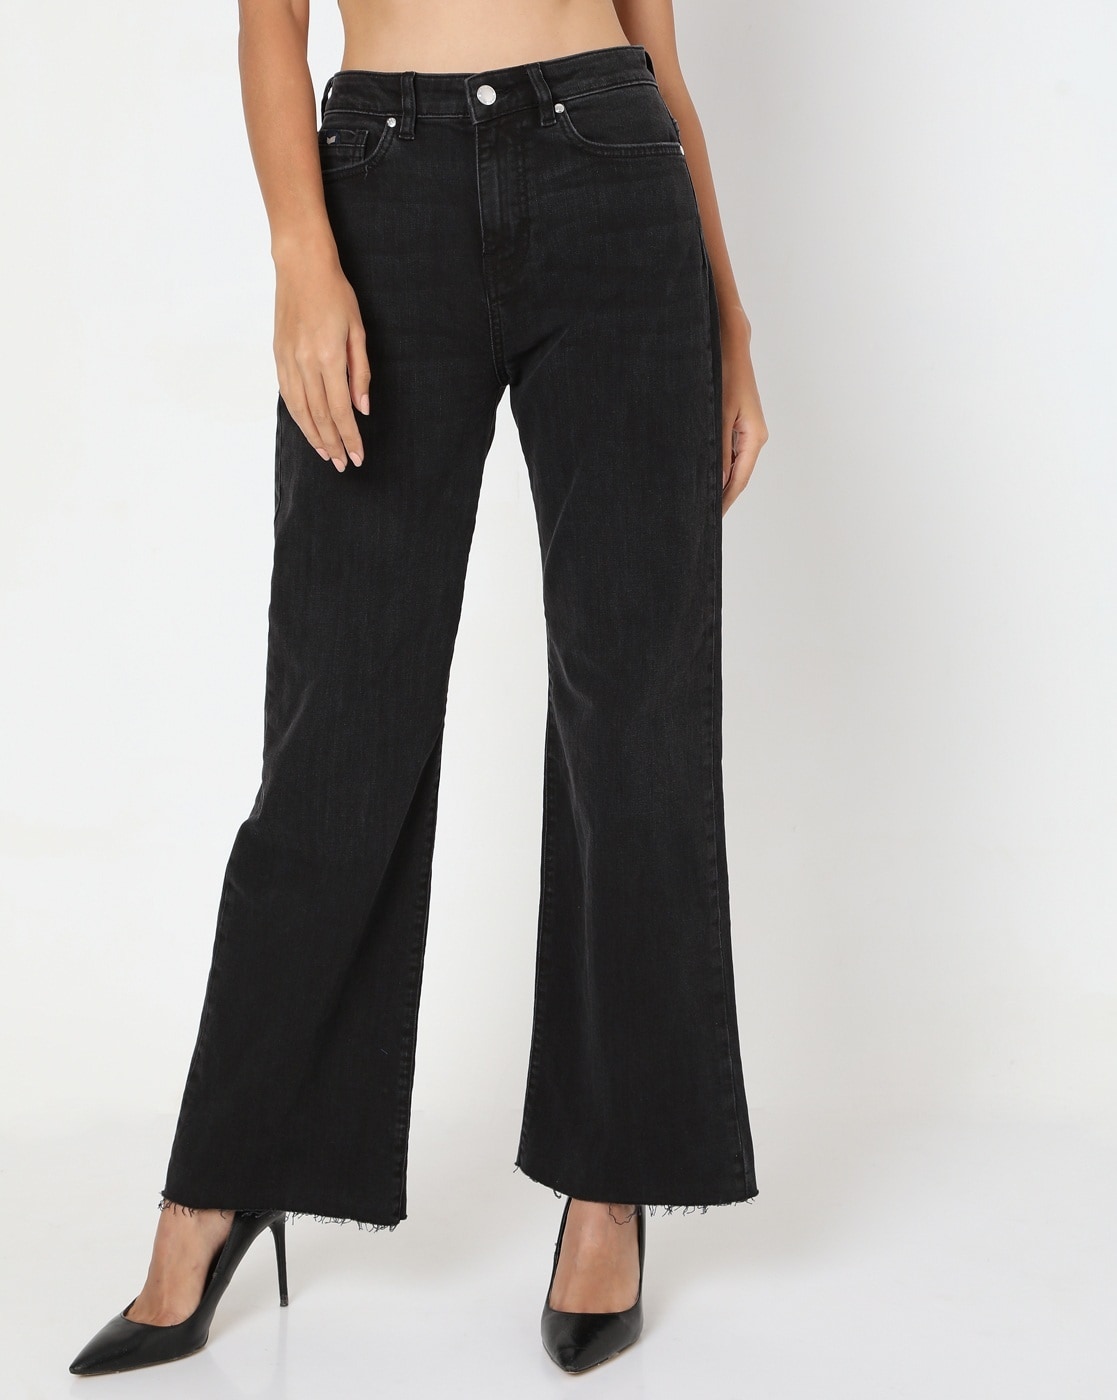 Off Duty India Jeans  Buy Off Duty India Two Tone Wash Wide Leg High Waist  Jeans Online  Nykaa Fashion